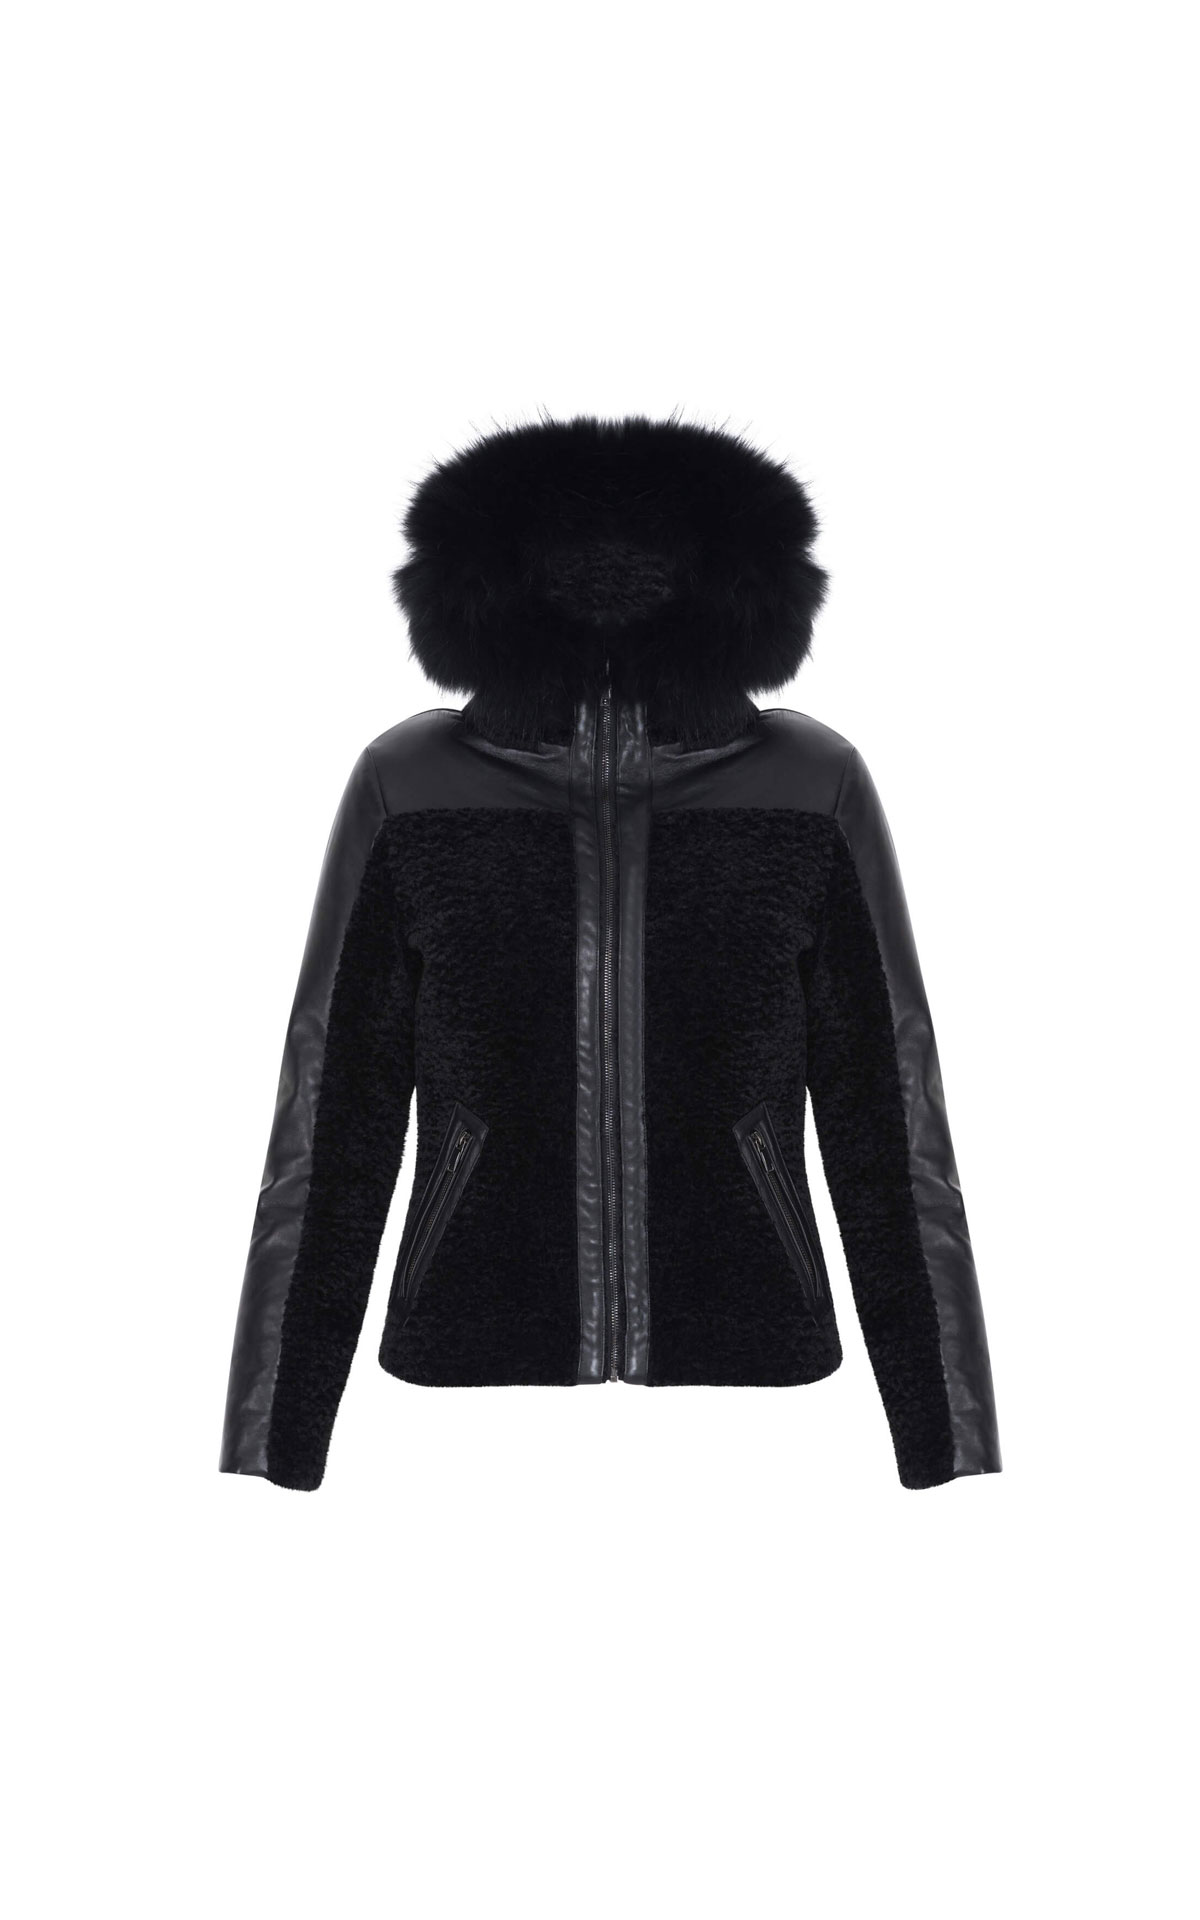 Anne Fontaine Sumiko coat from Bicester Village